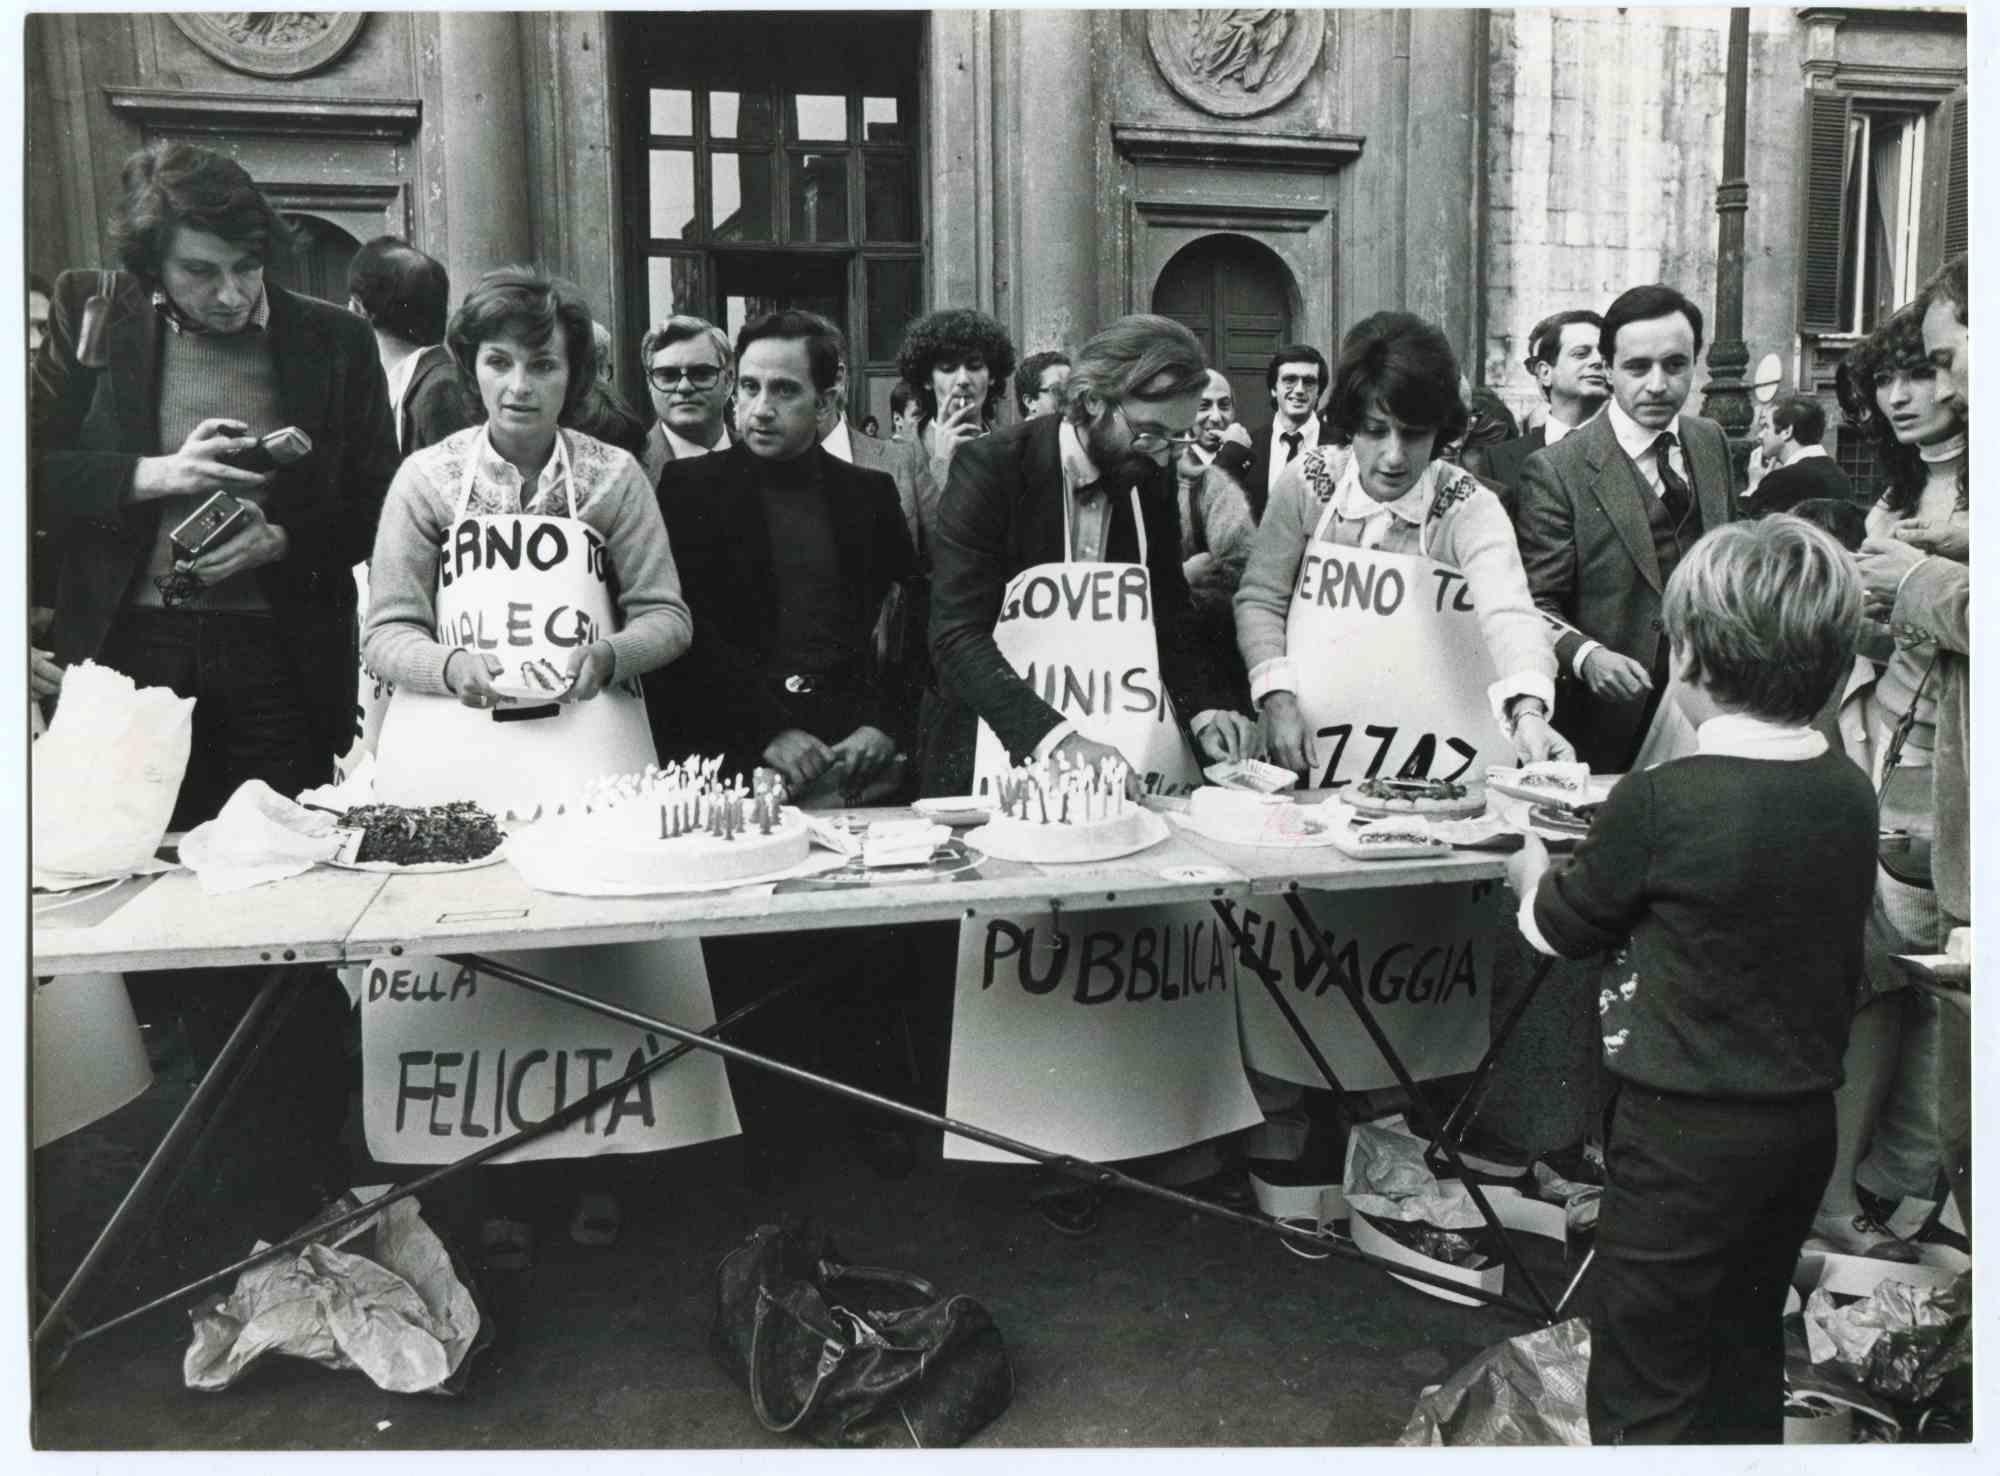 The Radical Protest - Historical Photograph About Women Rights - 1980